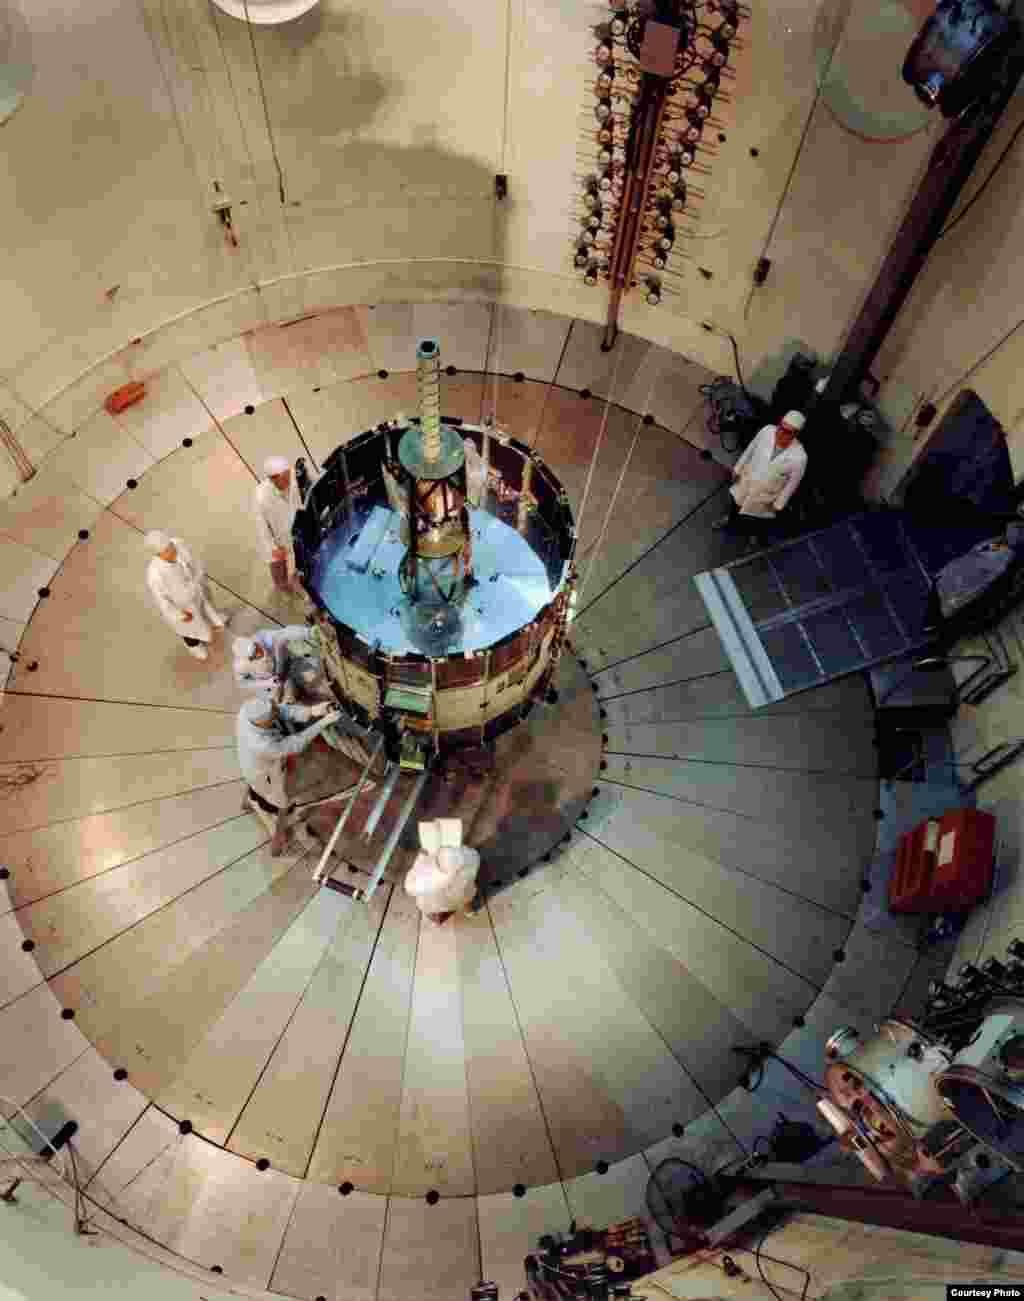 ISEE-3 in the test chamber at Cape Canaveral, Florida where the craft was launched in 1978. (Ed Grebenstein)